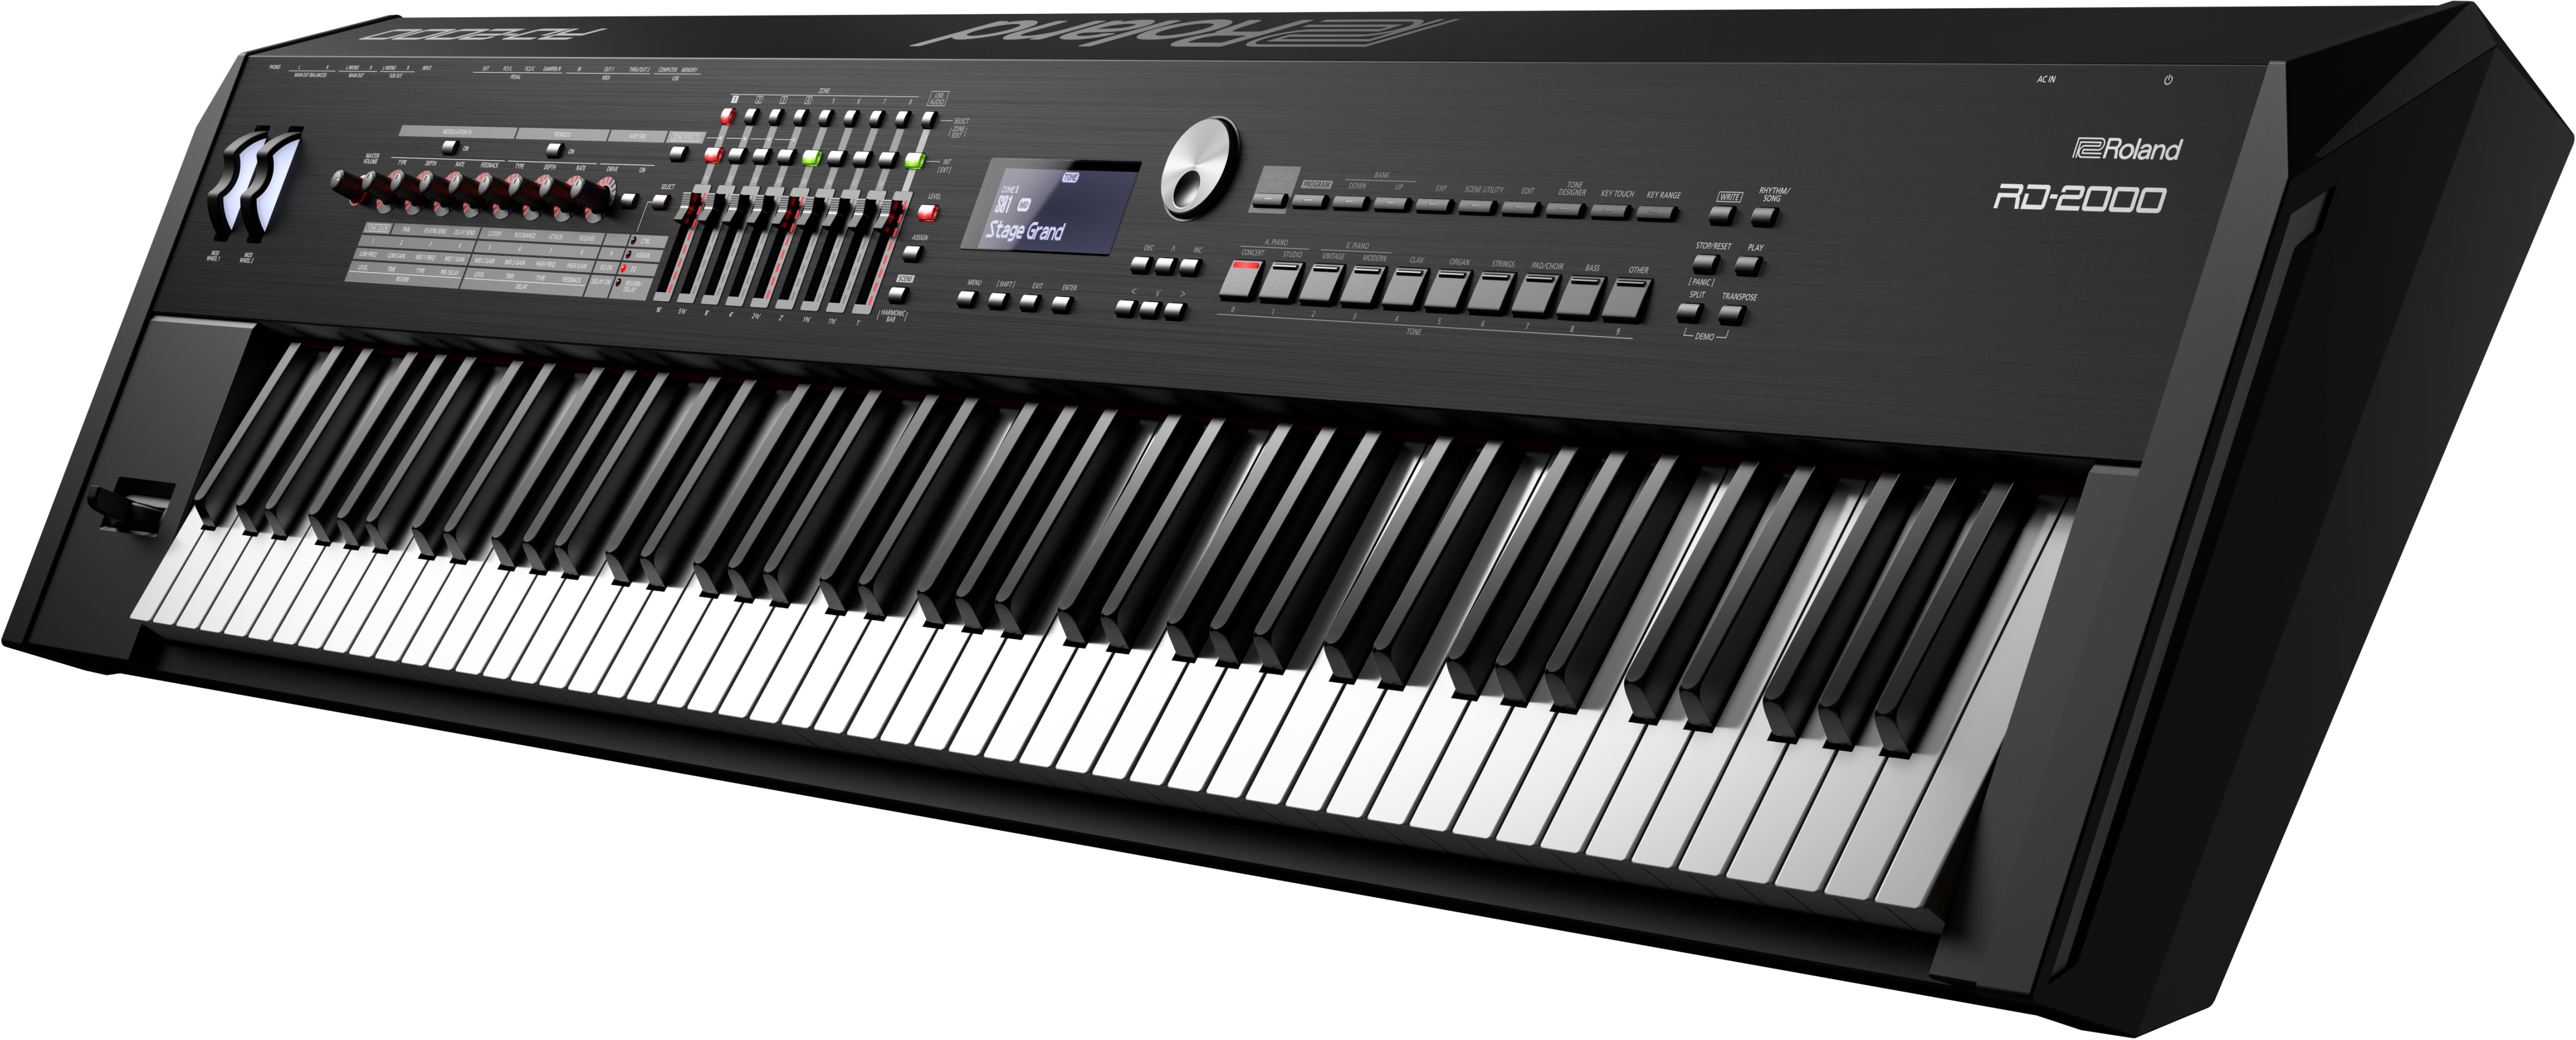 RD-2000 Stagepiano